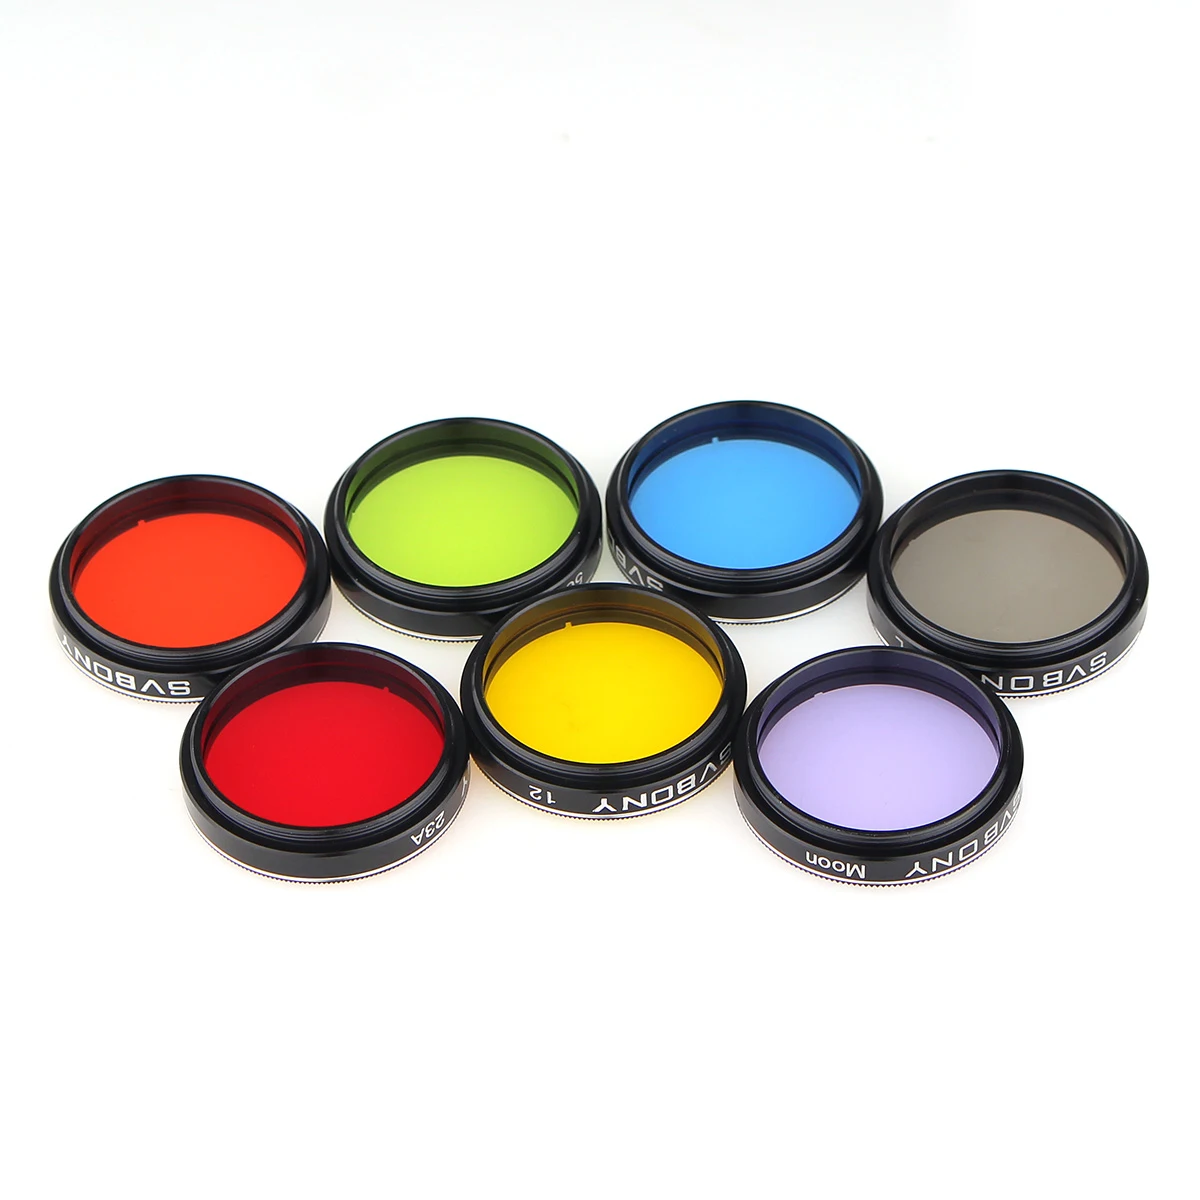 SVBONY Filter 1.25" Moon +CPL Filter+Five Color Filter Kit for Enhance Lunar&Planetary View Reduces Light Pollution SV155